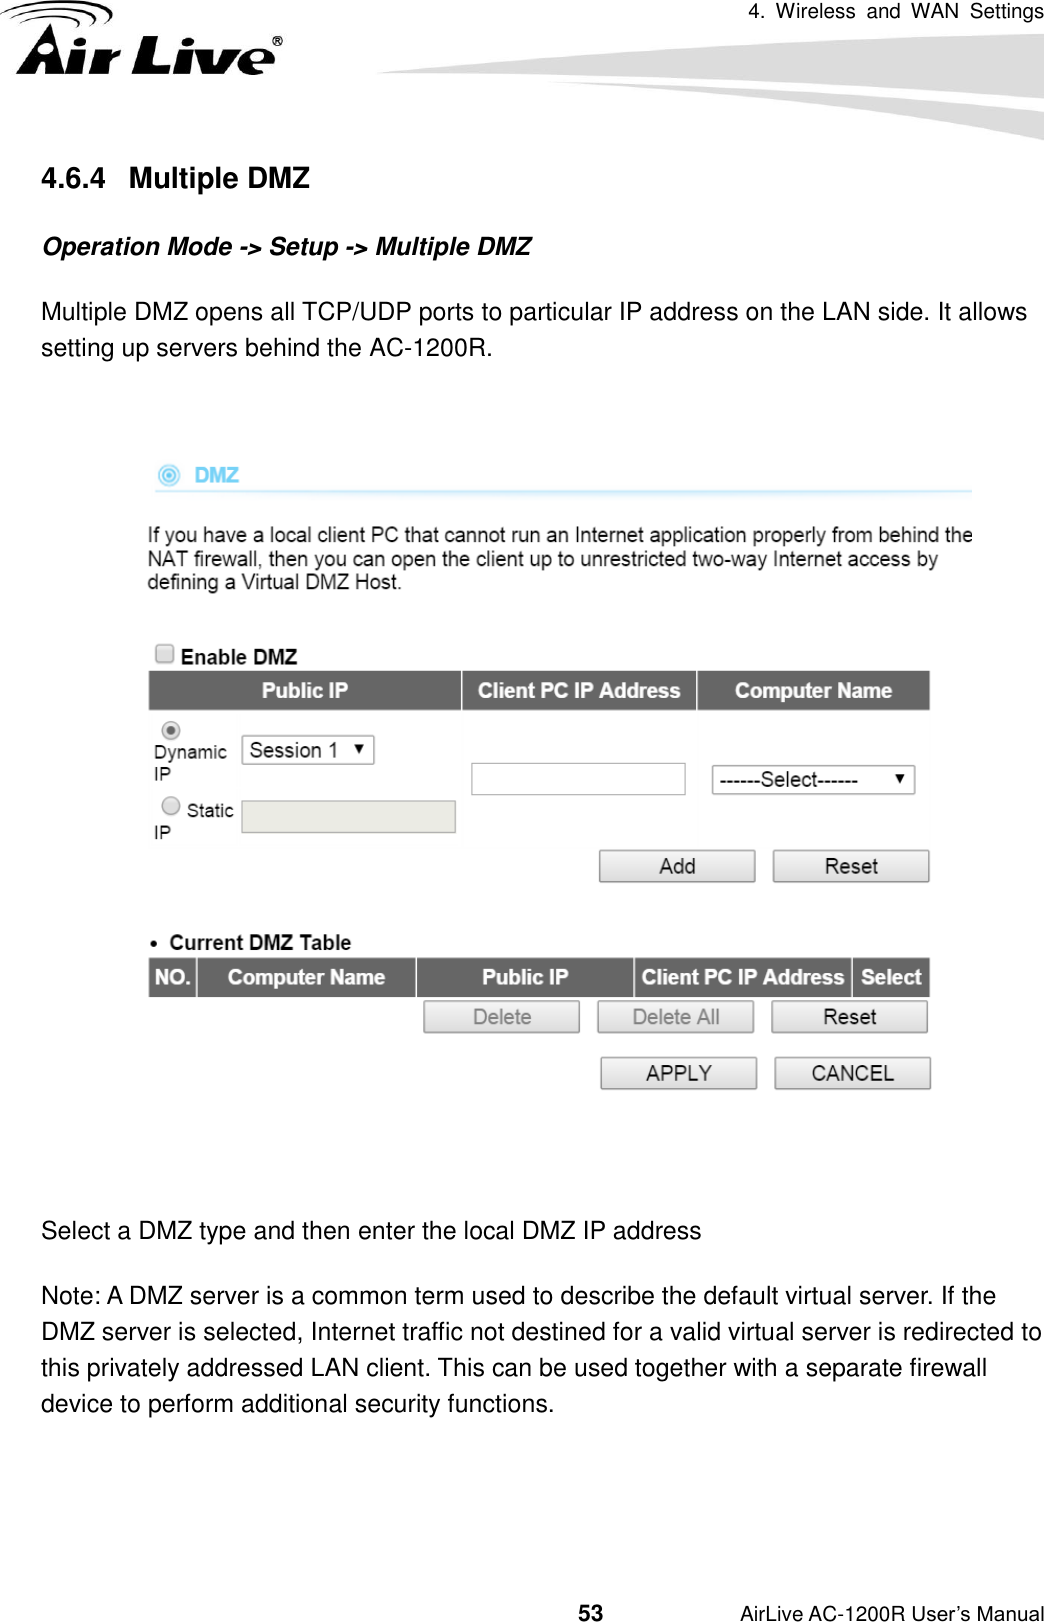 4.  Wireless  and  WAN  Settings                                         53           AirLive AC-1200R User’s Manual 4.6.4   Multiple DMZ Operation Mode -&gt; Setup -&gt; Multiple DMZ Multiple DMZ opens all TCP/UDP ports to particular IP address on the LAN side. It allows setting up servers behind the AC-1200R.    Select a DMZ type and then enter the local DMZ IP address Note: A DMZ server is a common term used to describe the default virtual server. If the DMZ server is selected, Internet traffic not destined for a valid virtual server is redirected to this privately addressed LAN client. This can be used together with a separate firewall device to perform additional security functions.  